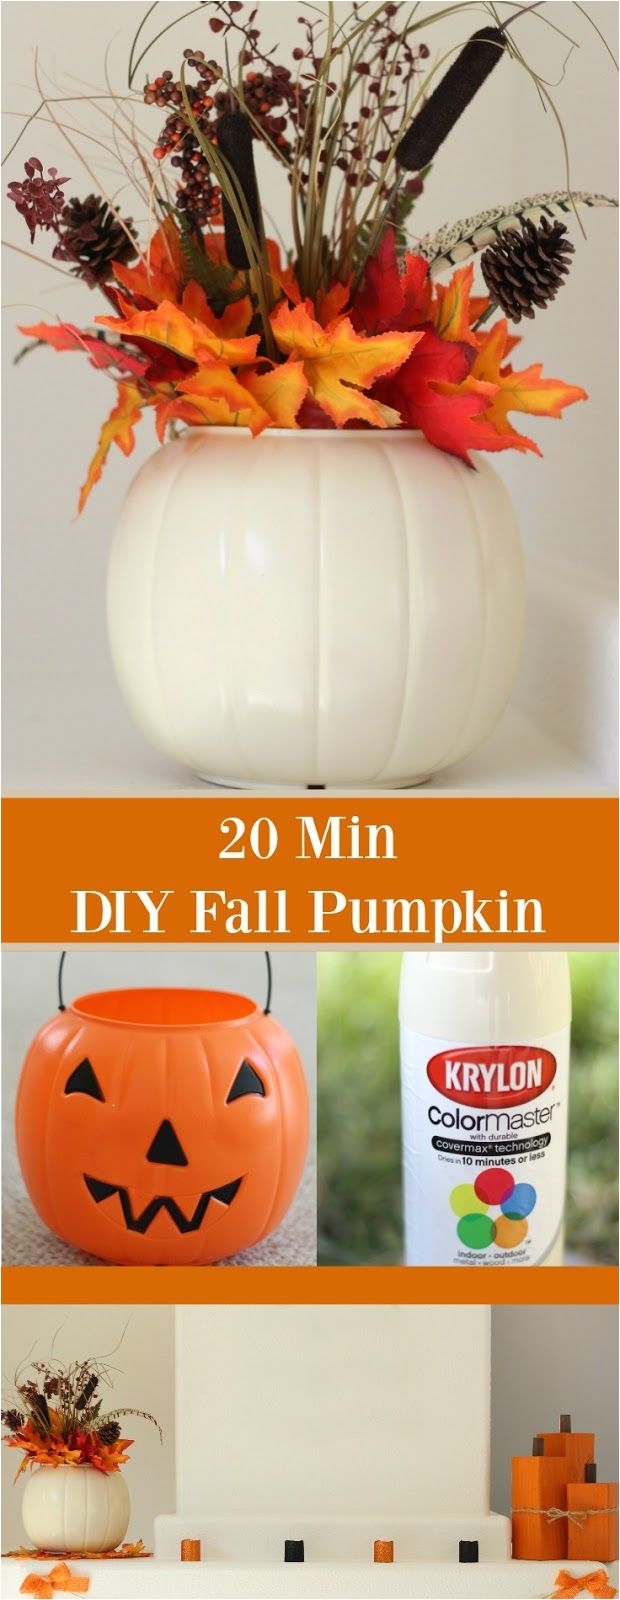 diy fall pumpkin this super easy diy fall pumpkin only takes 20 minutes start to